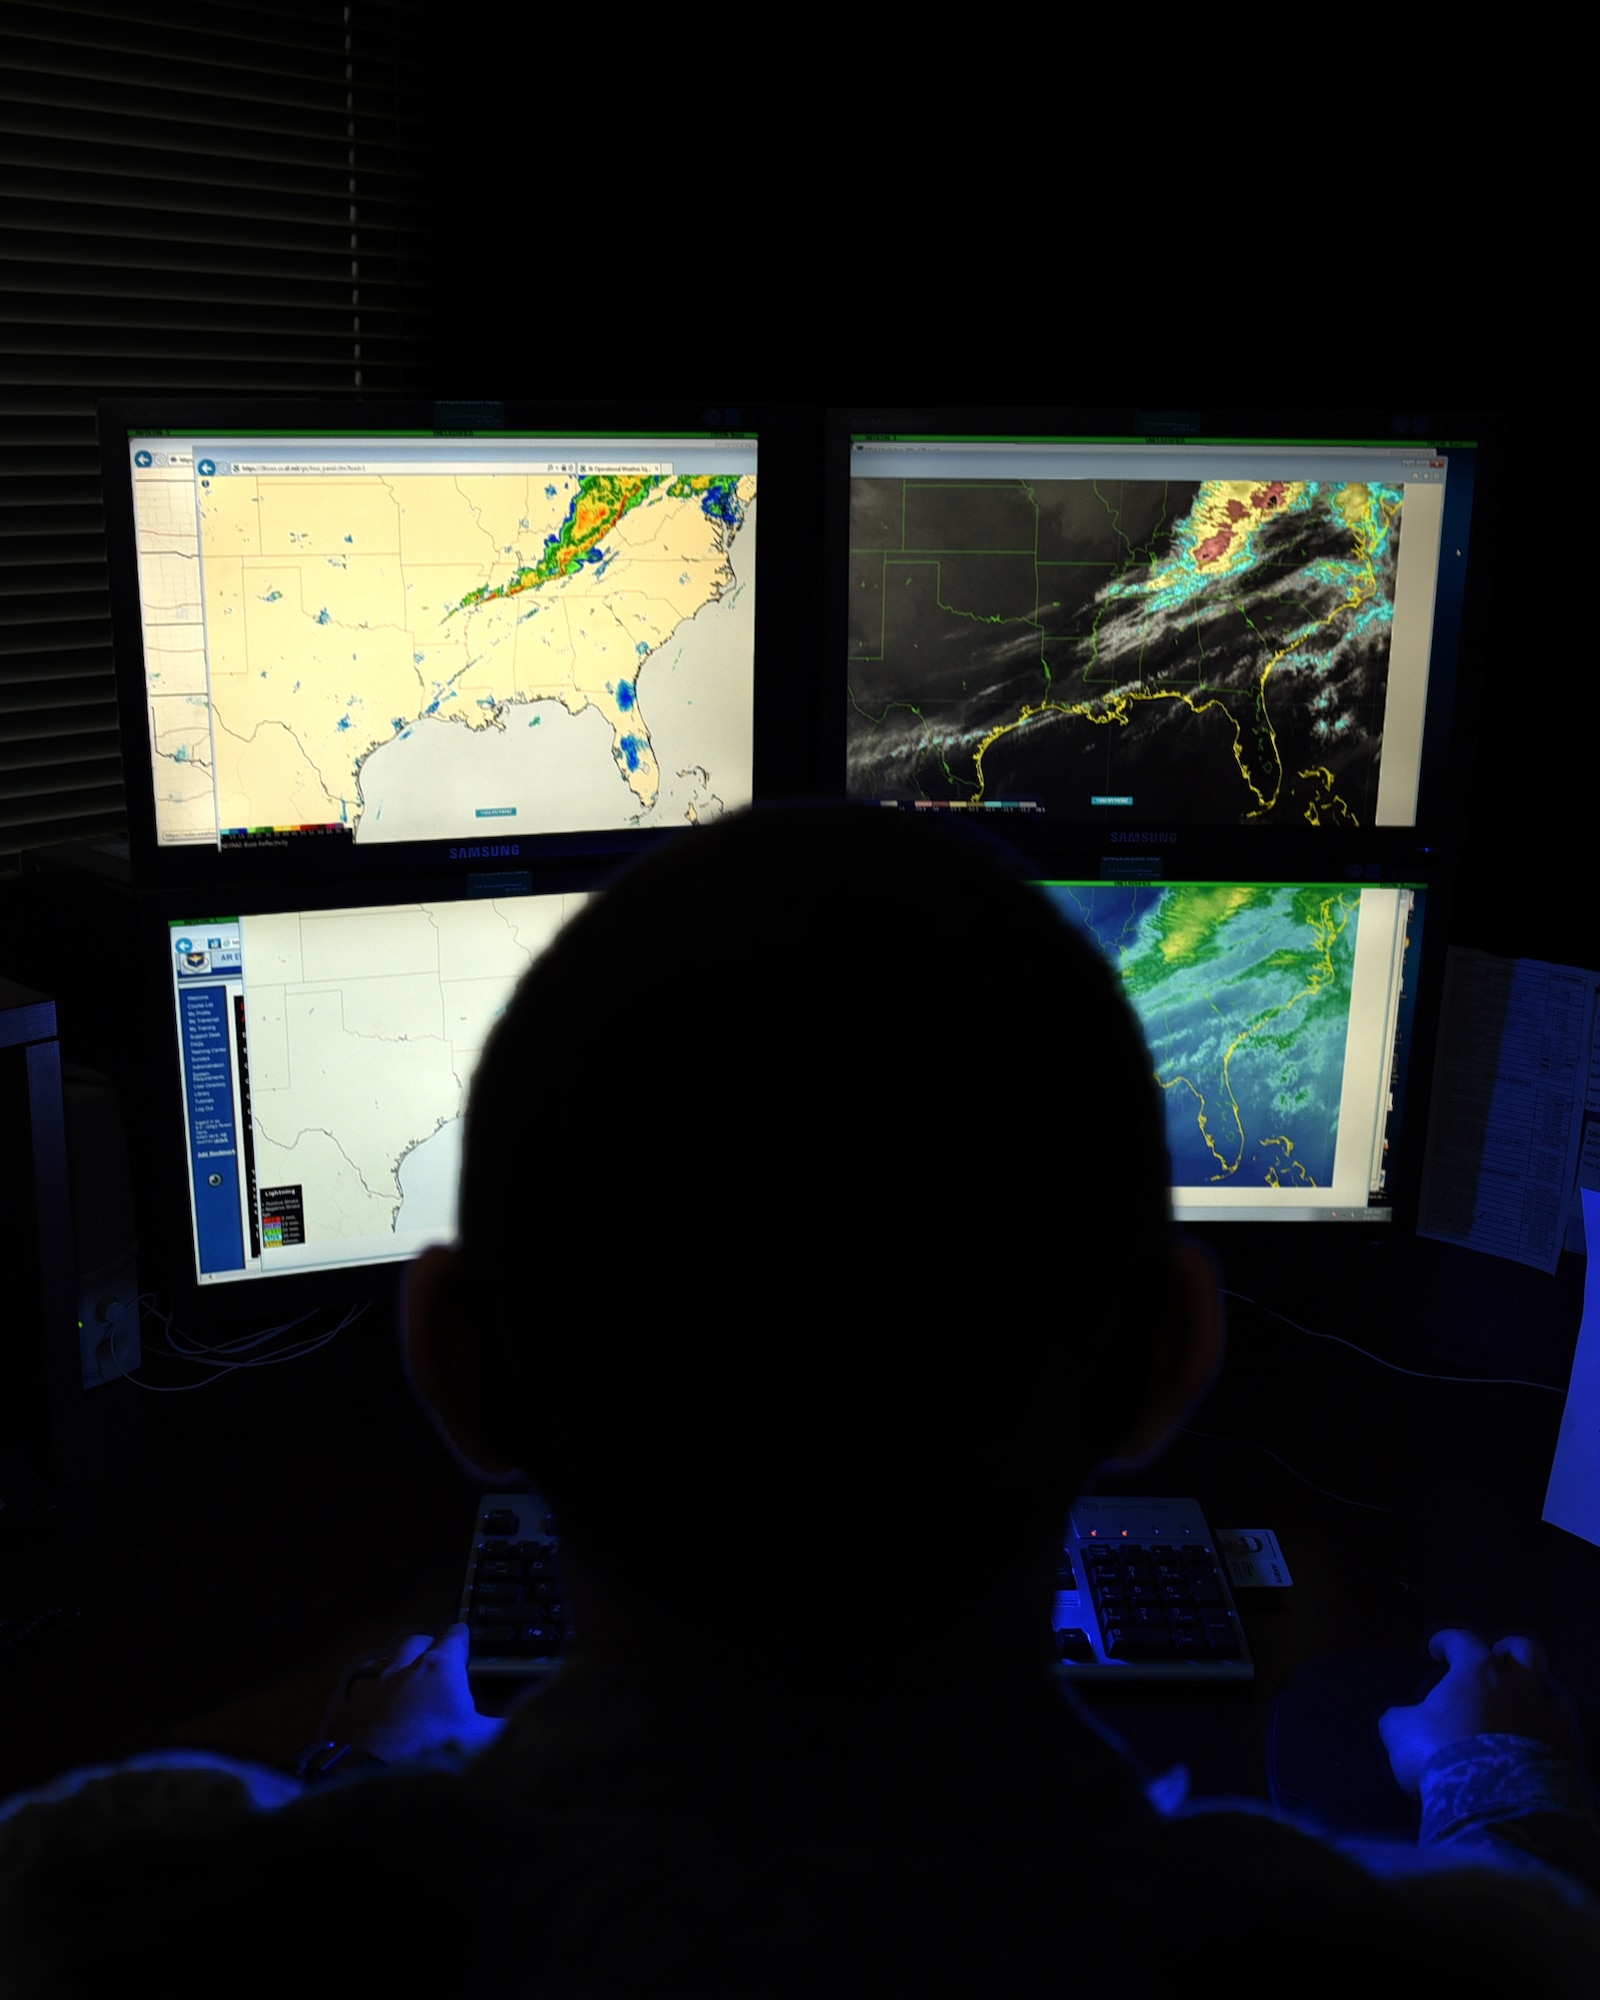 U.S. Air Force Airman 1st Class Jacob Phipps, 19th Operations Support Squadron Weather Flight journeyman, monitors a radar screen Feb. 29, 2017, at Little Rock Air Force Base, Ark. The radars enable Phipps to identify precipitation, lightning strikes and potential thunderstorms within the local area. (U.S. Air Force photo by Airman 1st Class Kevin Sommer Giron)